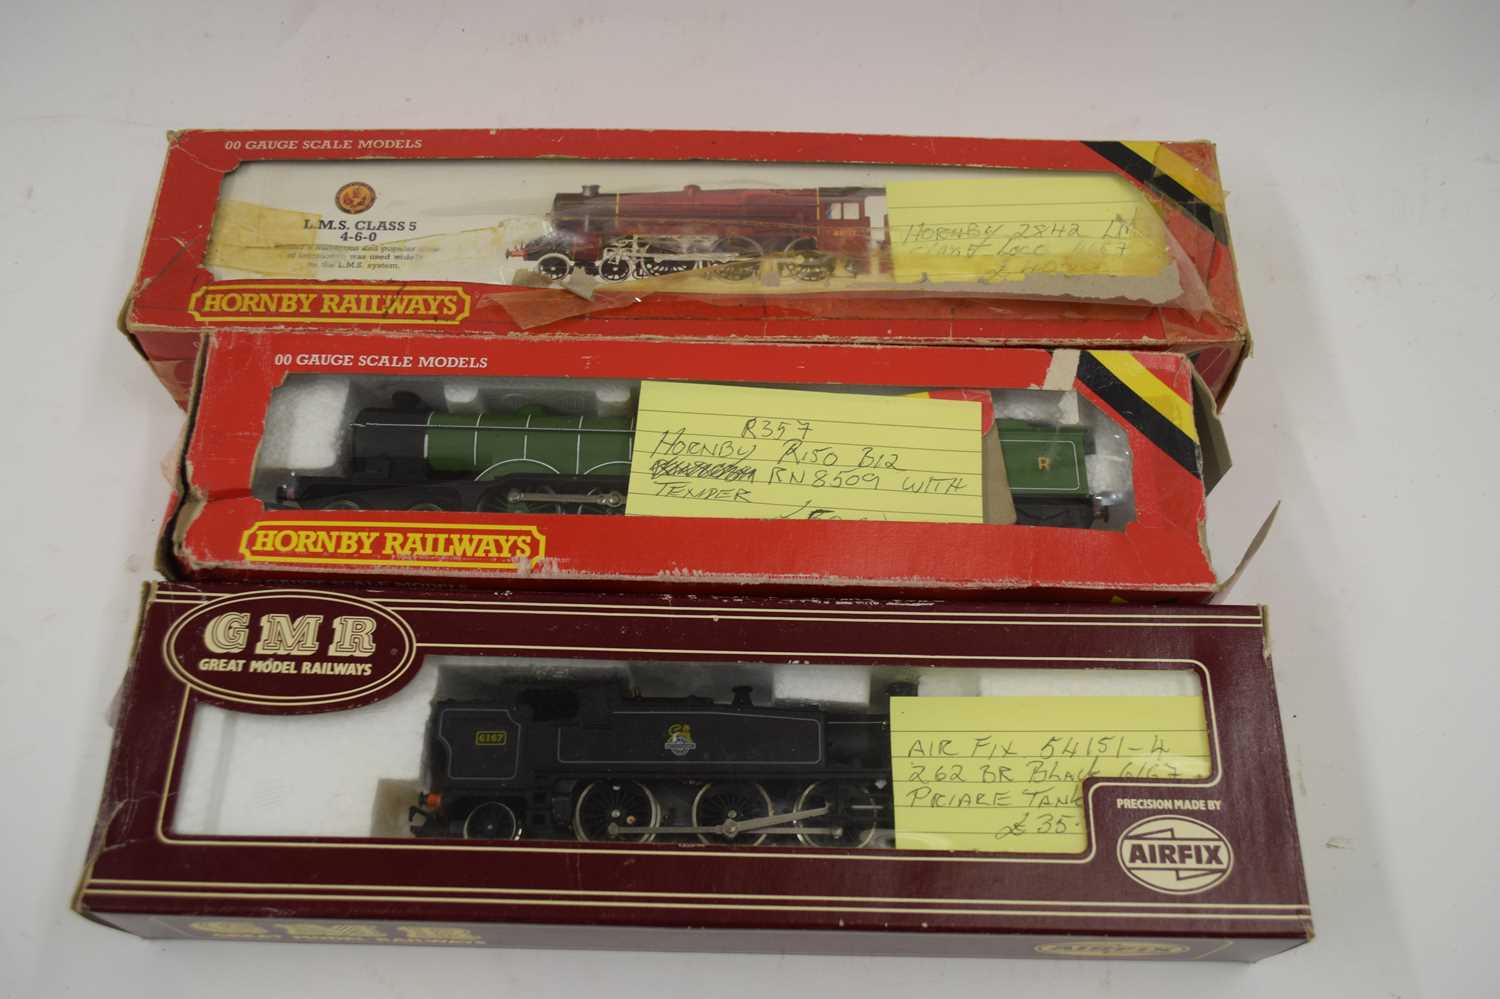 00 GAUGE MODEL RAILWAY, HORNBY LMS CLASS 5 LOCOMOTIVE AND HORNBY R150 LOCOMOTIVE WITH TENDER (BOXED)